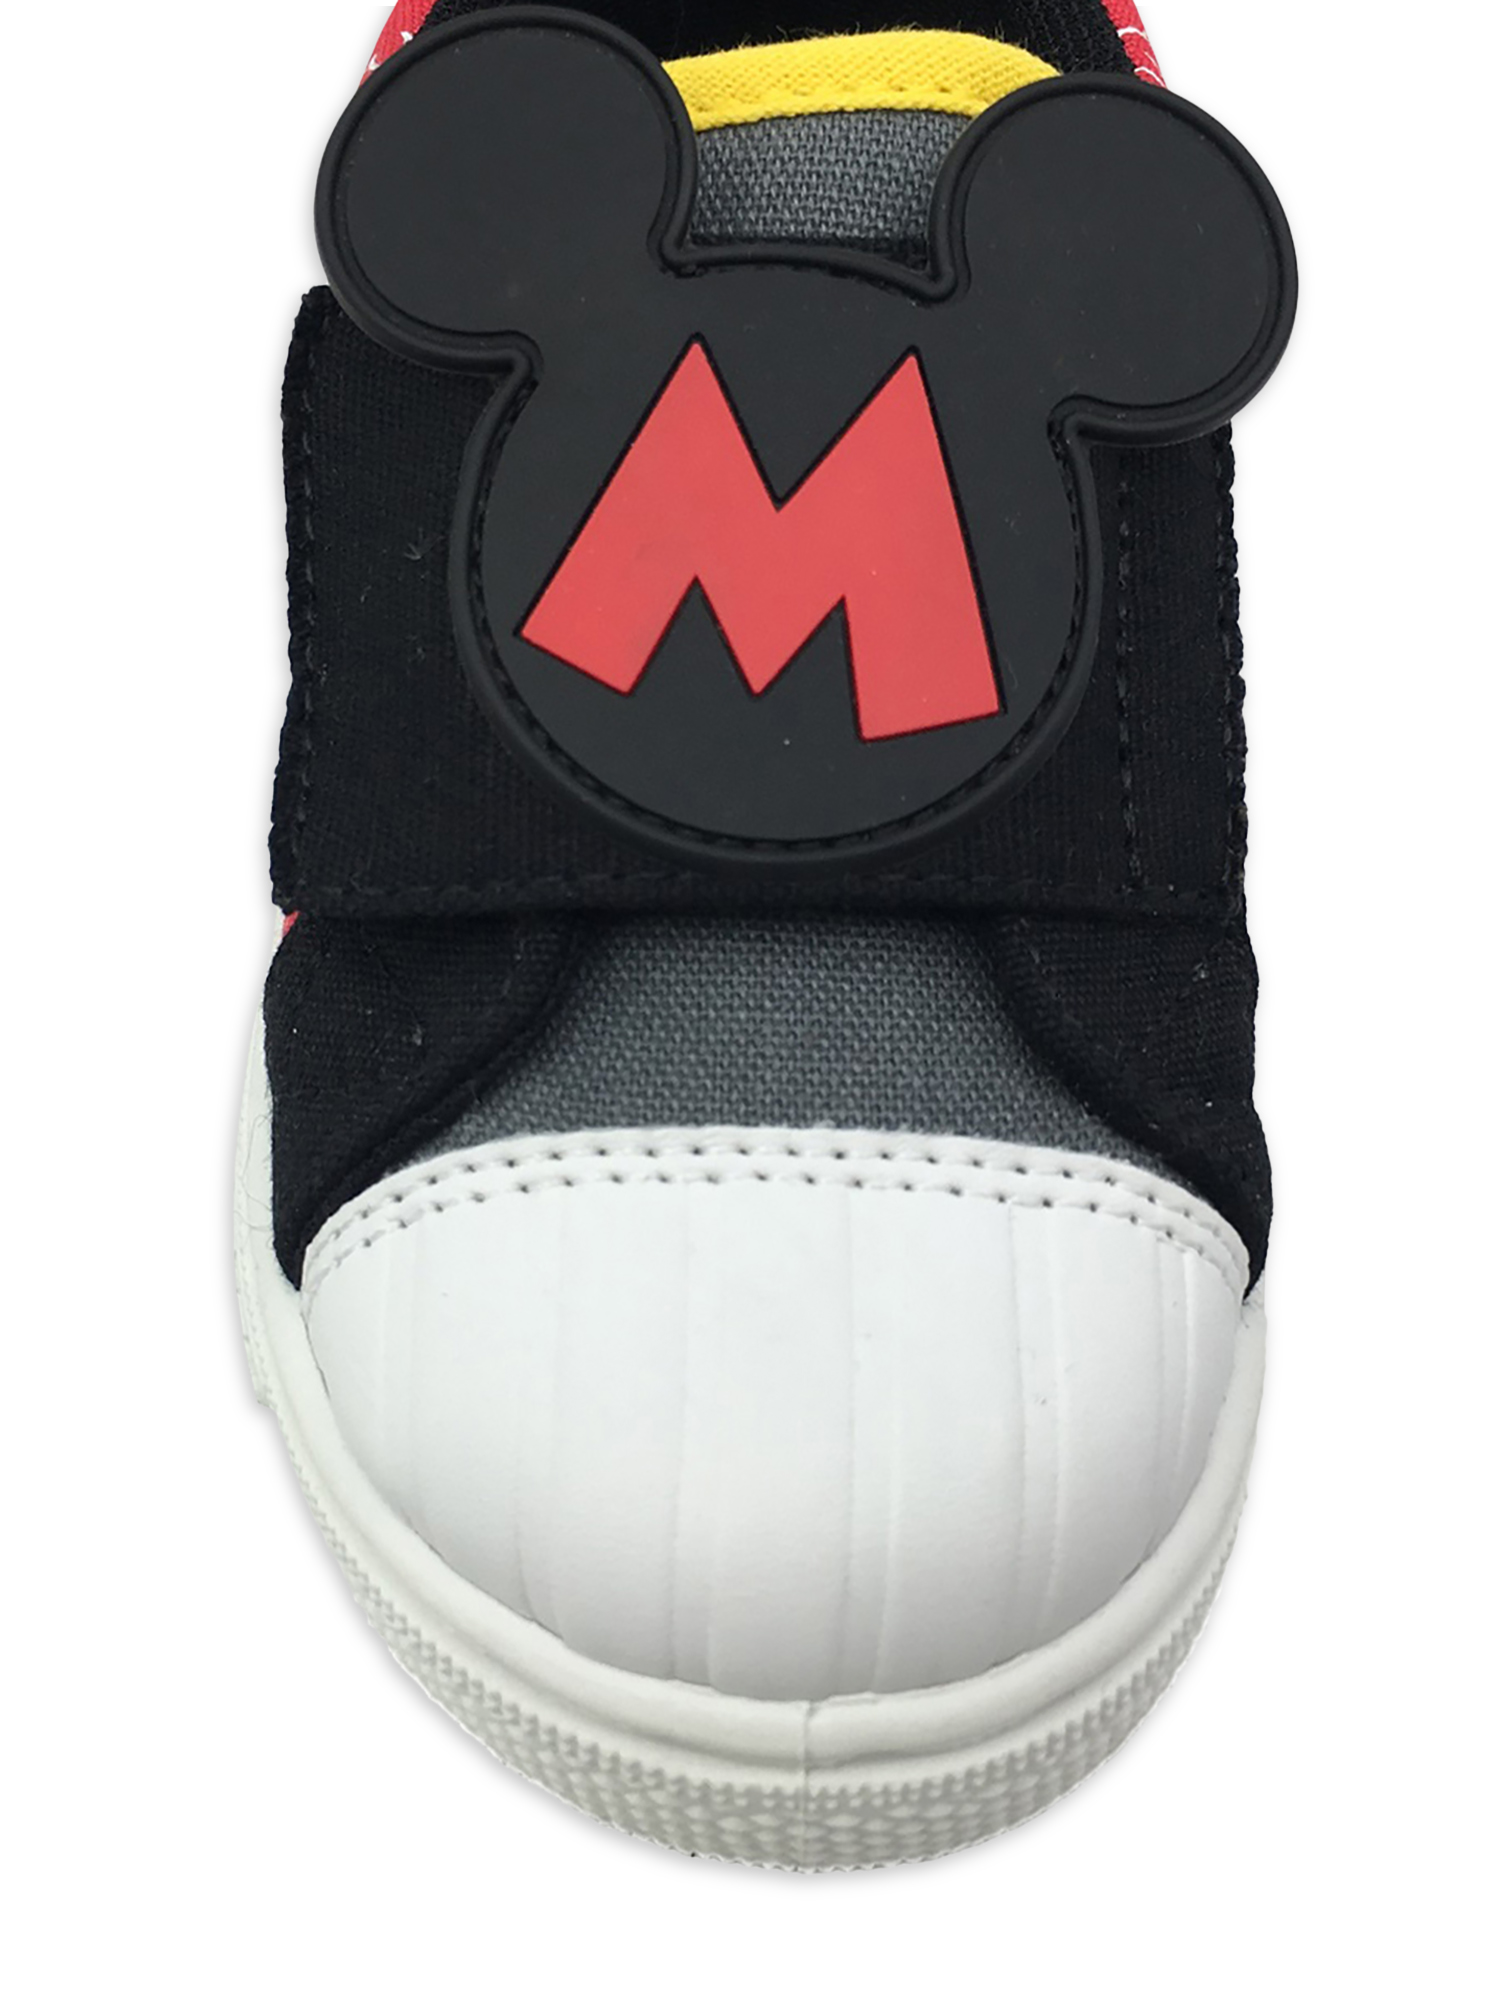 Mickey Mouse Cap Toe Casual Sneaker (Toddler Boys) - image 5 of 8